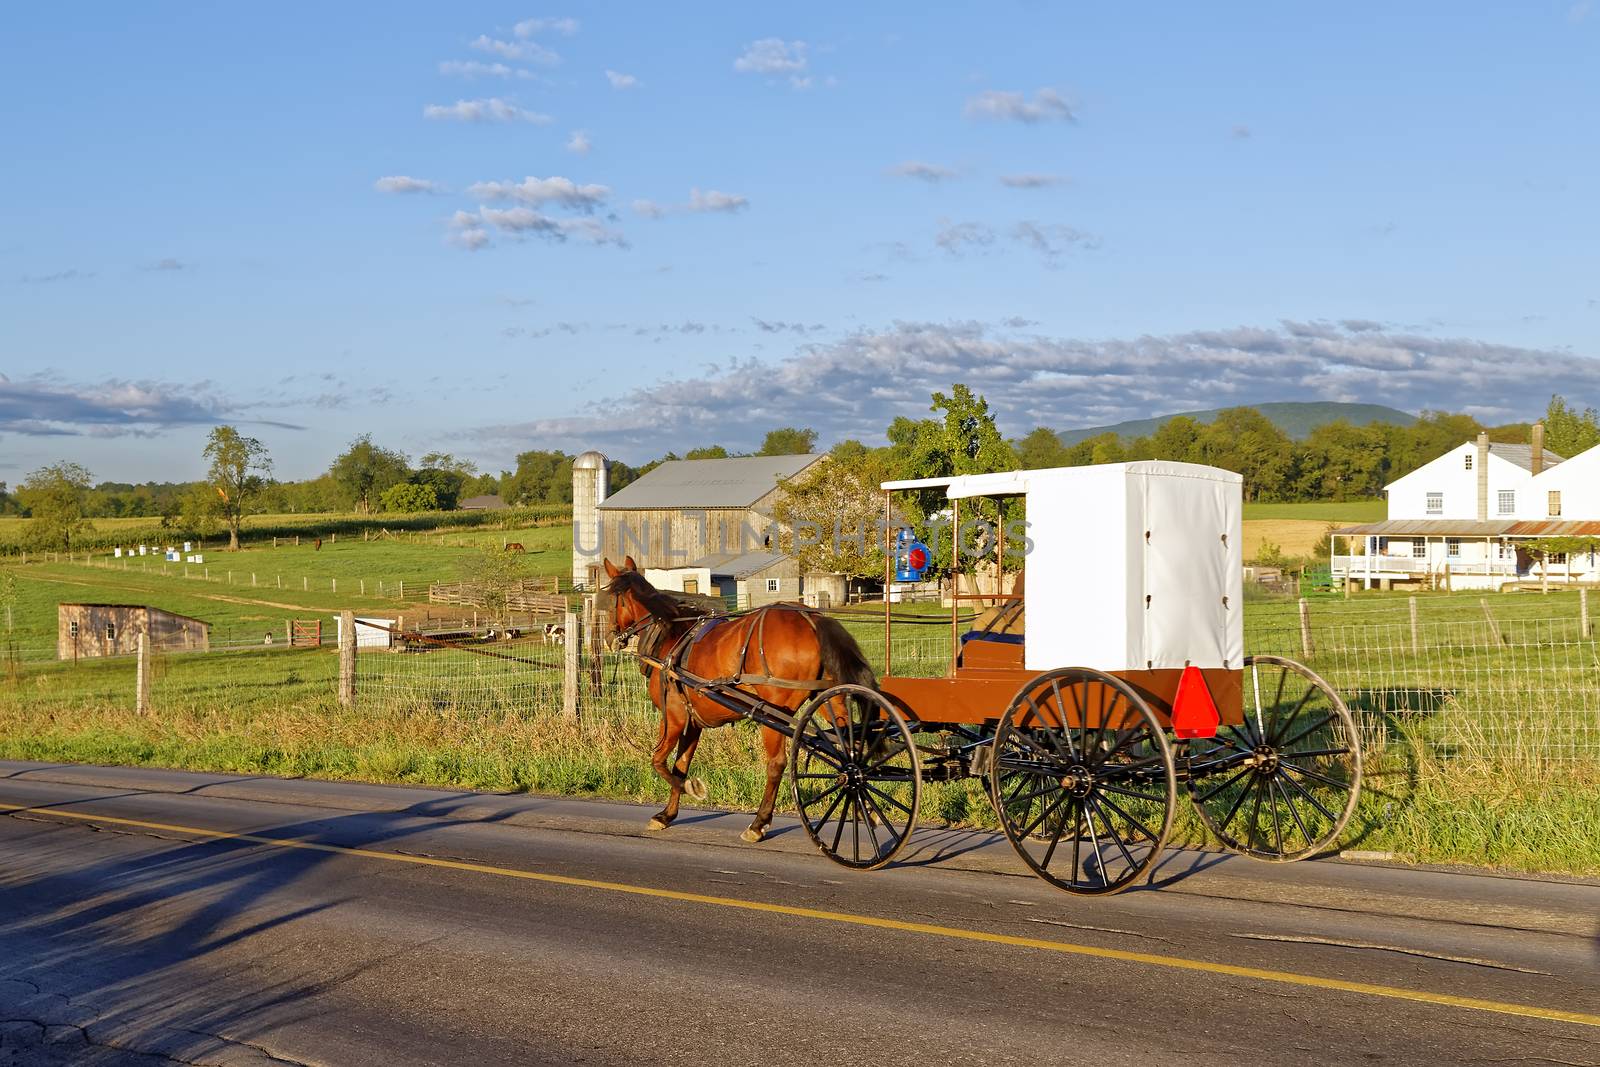 An Amish horse and carriage travels on a rural road in Mifflin County, Pennsylvania, USA.